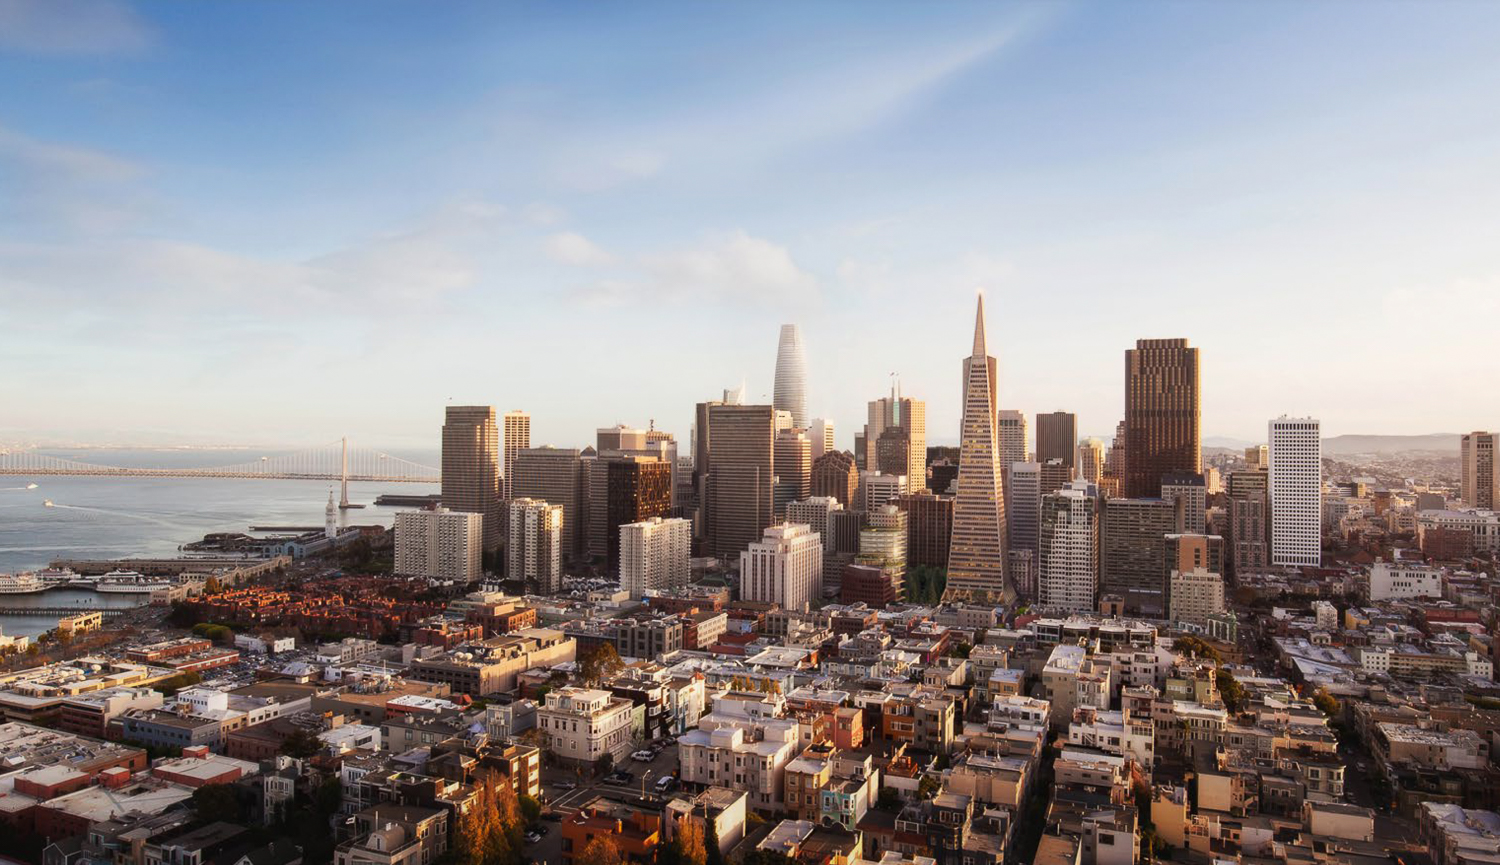 Transamerica Pyramid and the skyline aerial view from Coit Tower, rendering by Foster + Partners